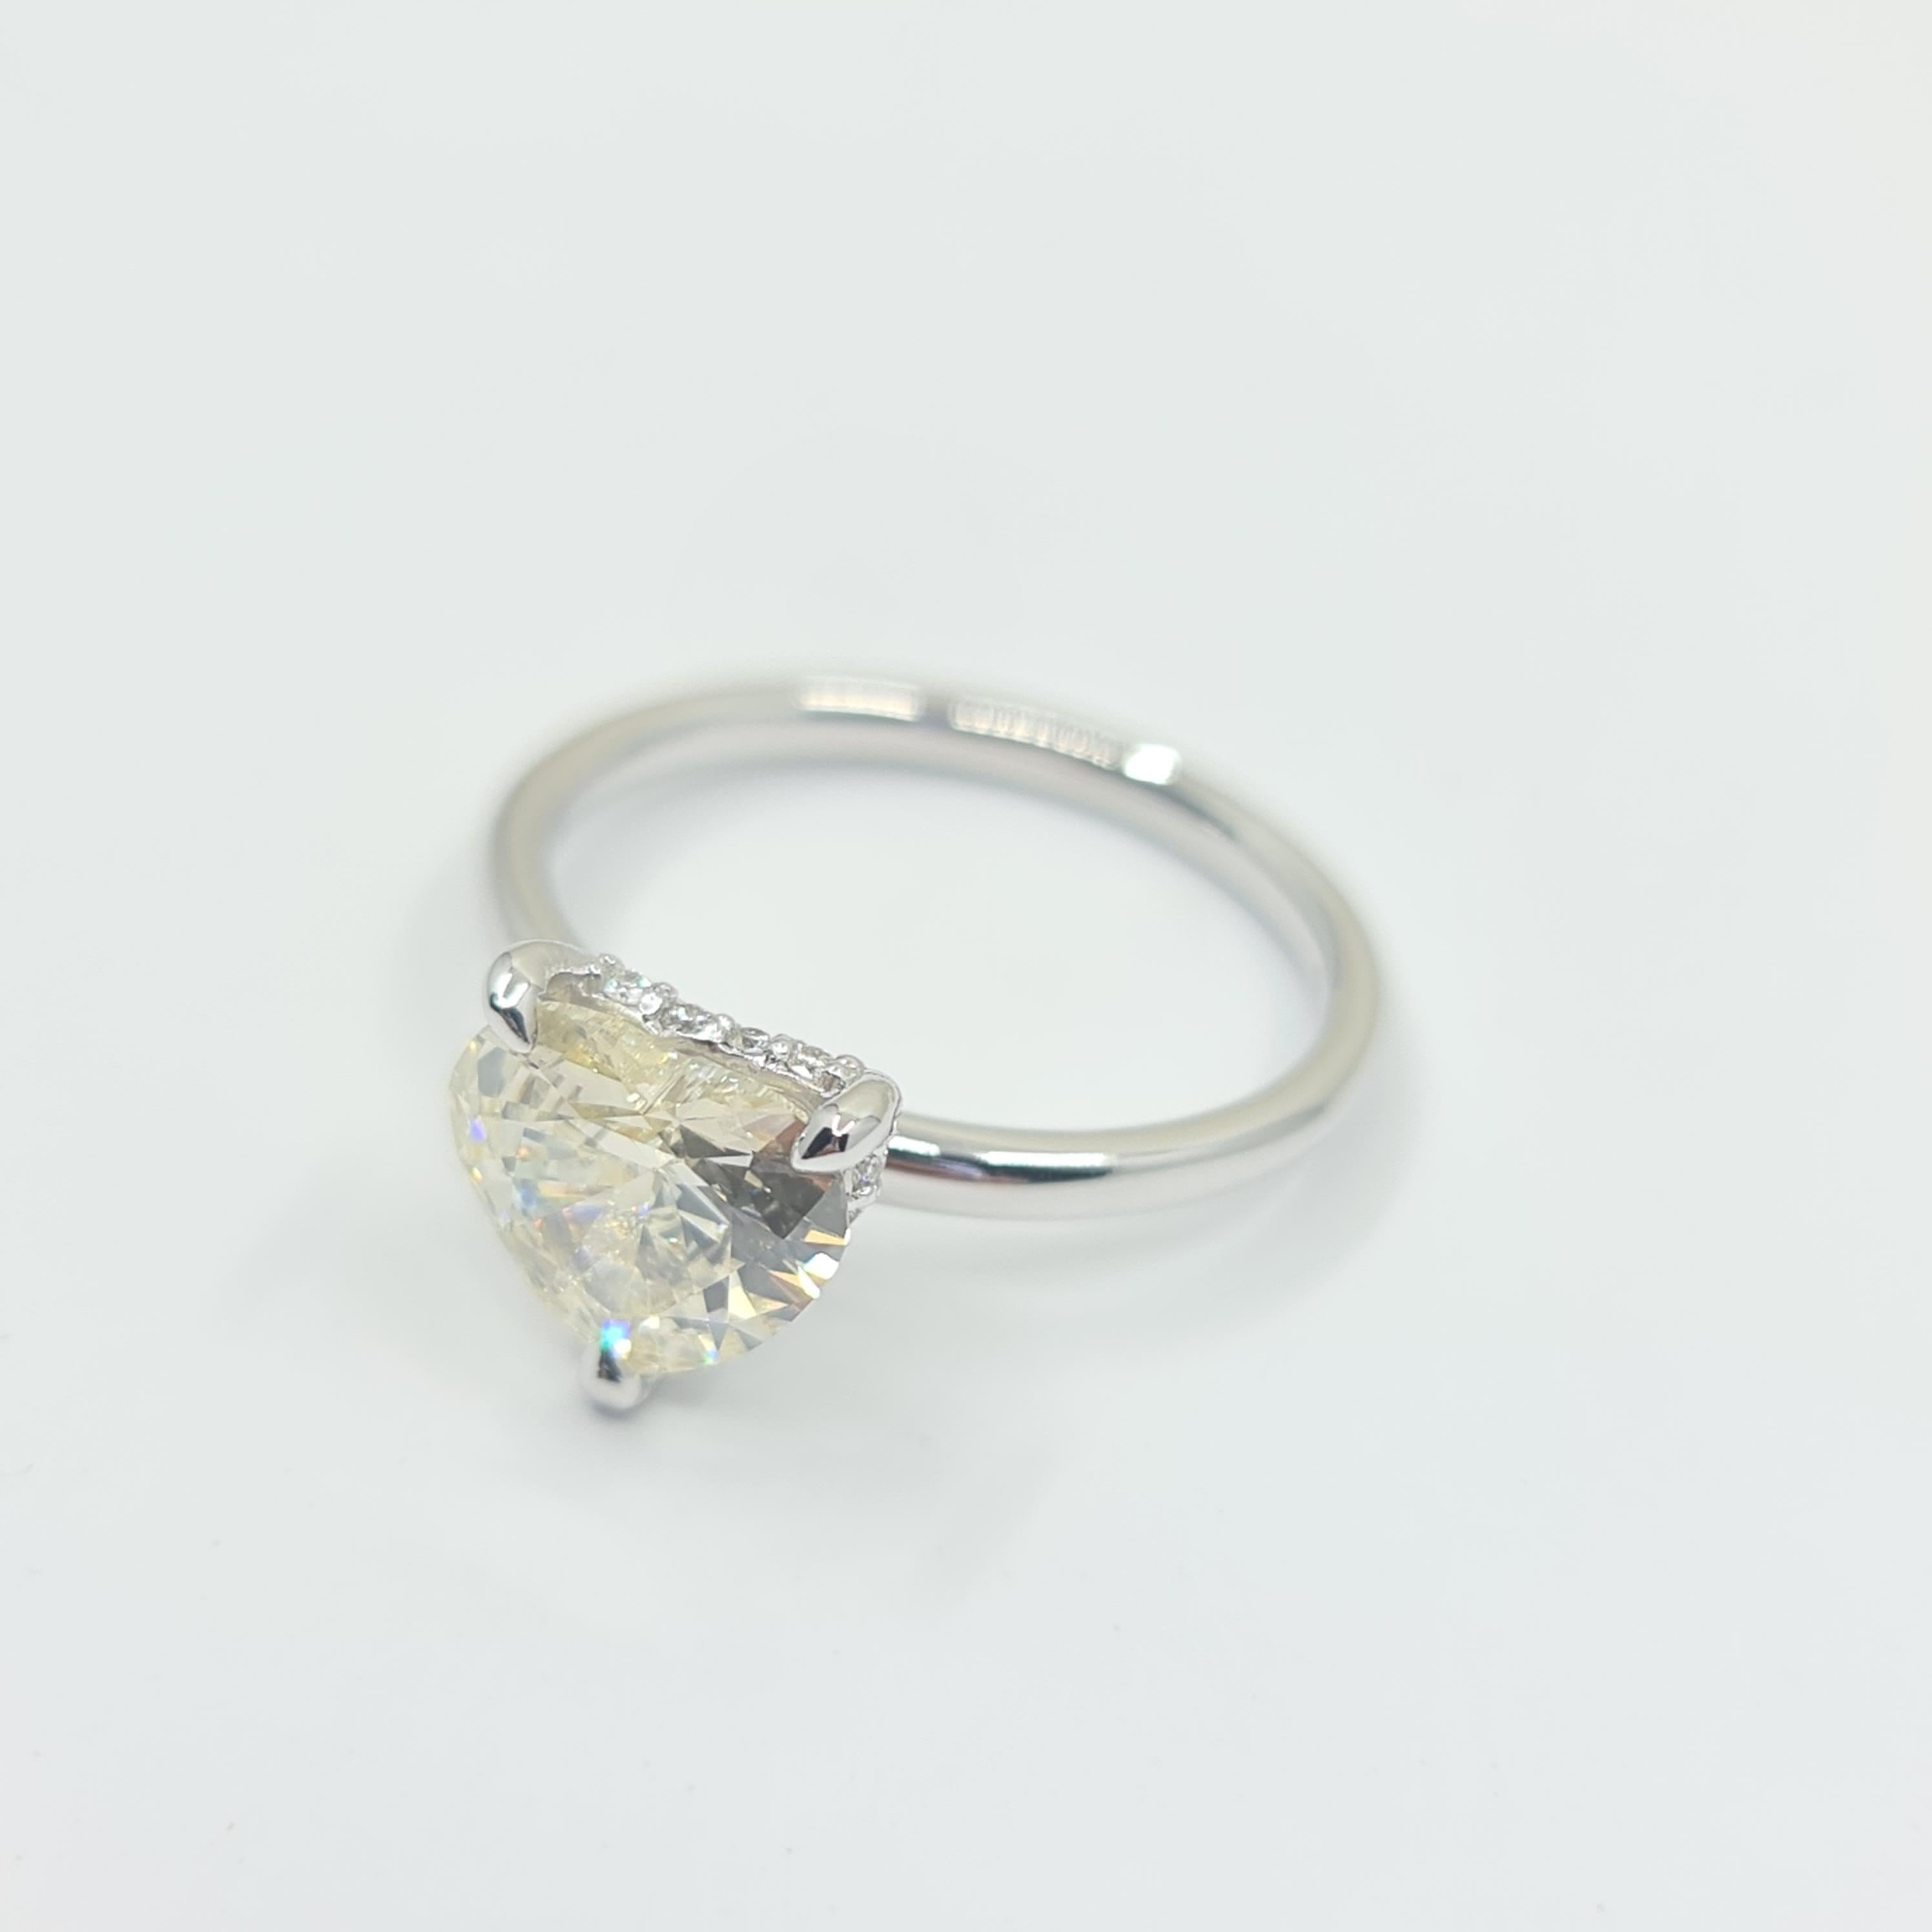 Modern Exquisite GIA Certified 1.60 Carat Heart Diamond Ring with 0.07 Carat Halo G/VS For Sale